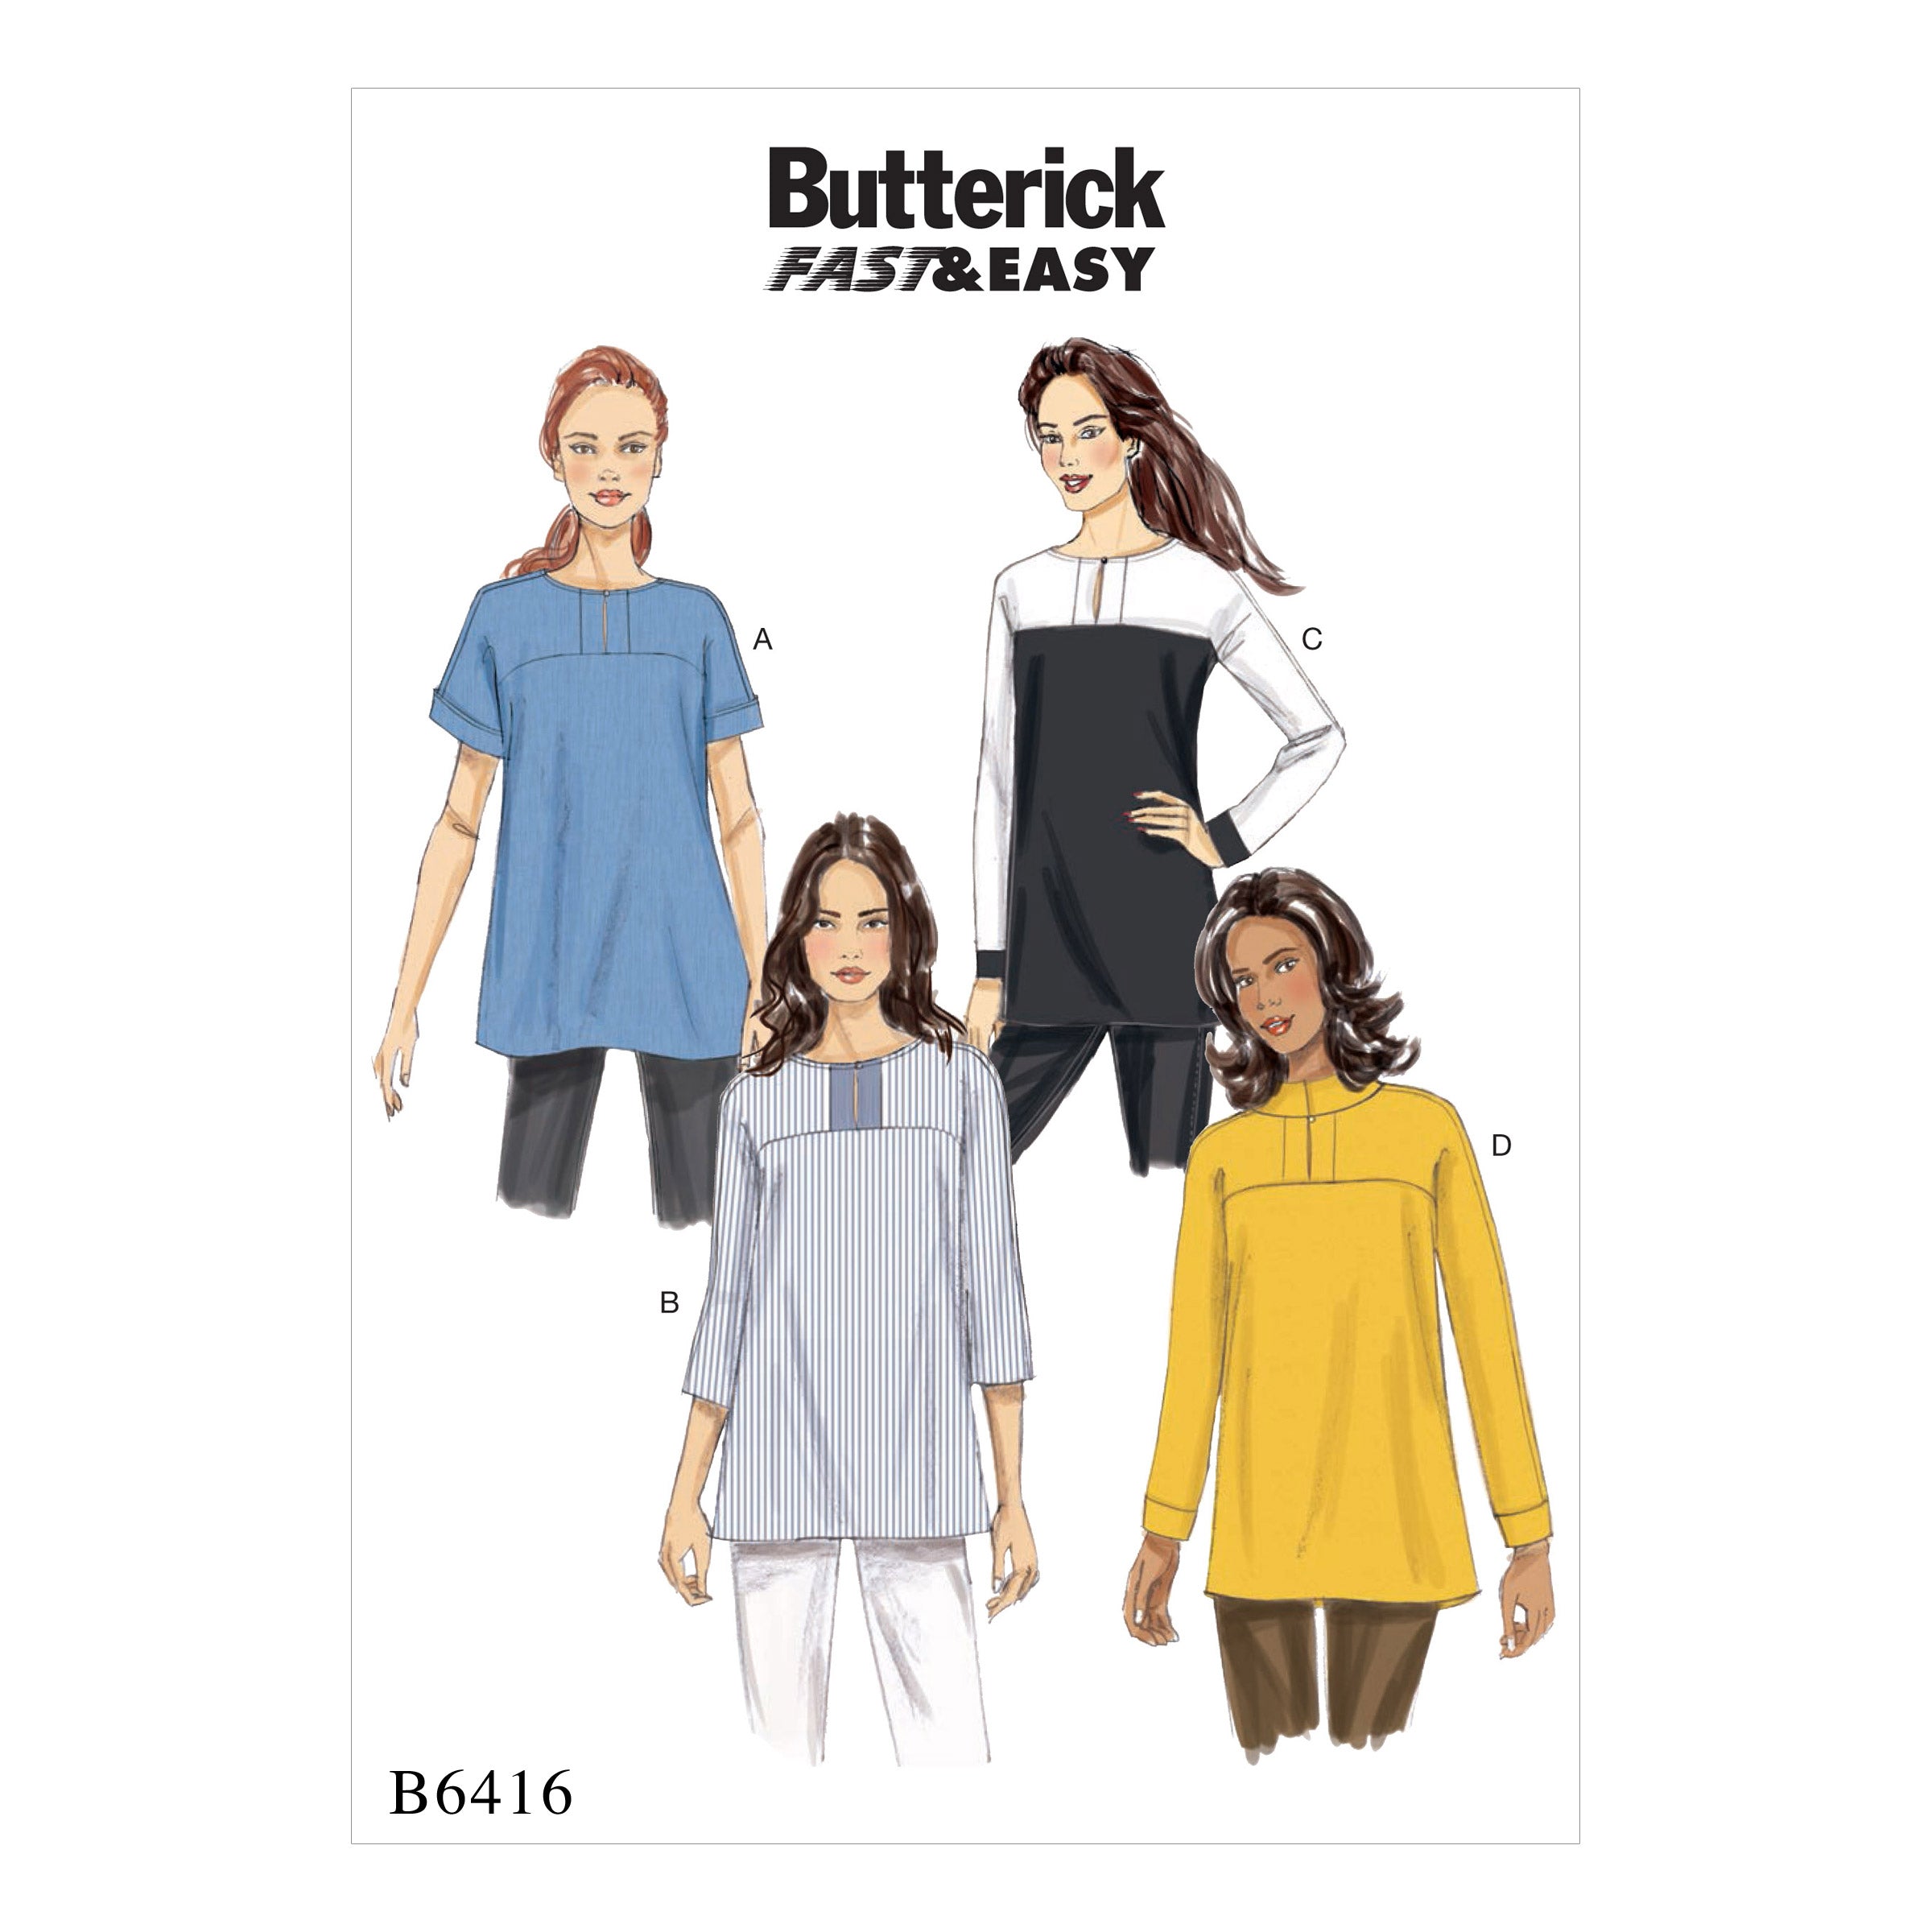 Butterick 6416 Misses' Button-Closure Tunics with Yokes Pattern from Jaycotts Sewing Supplies